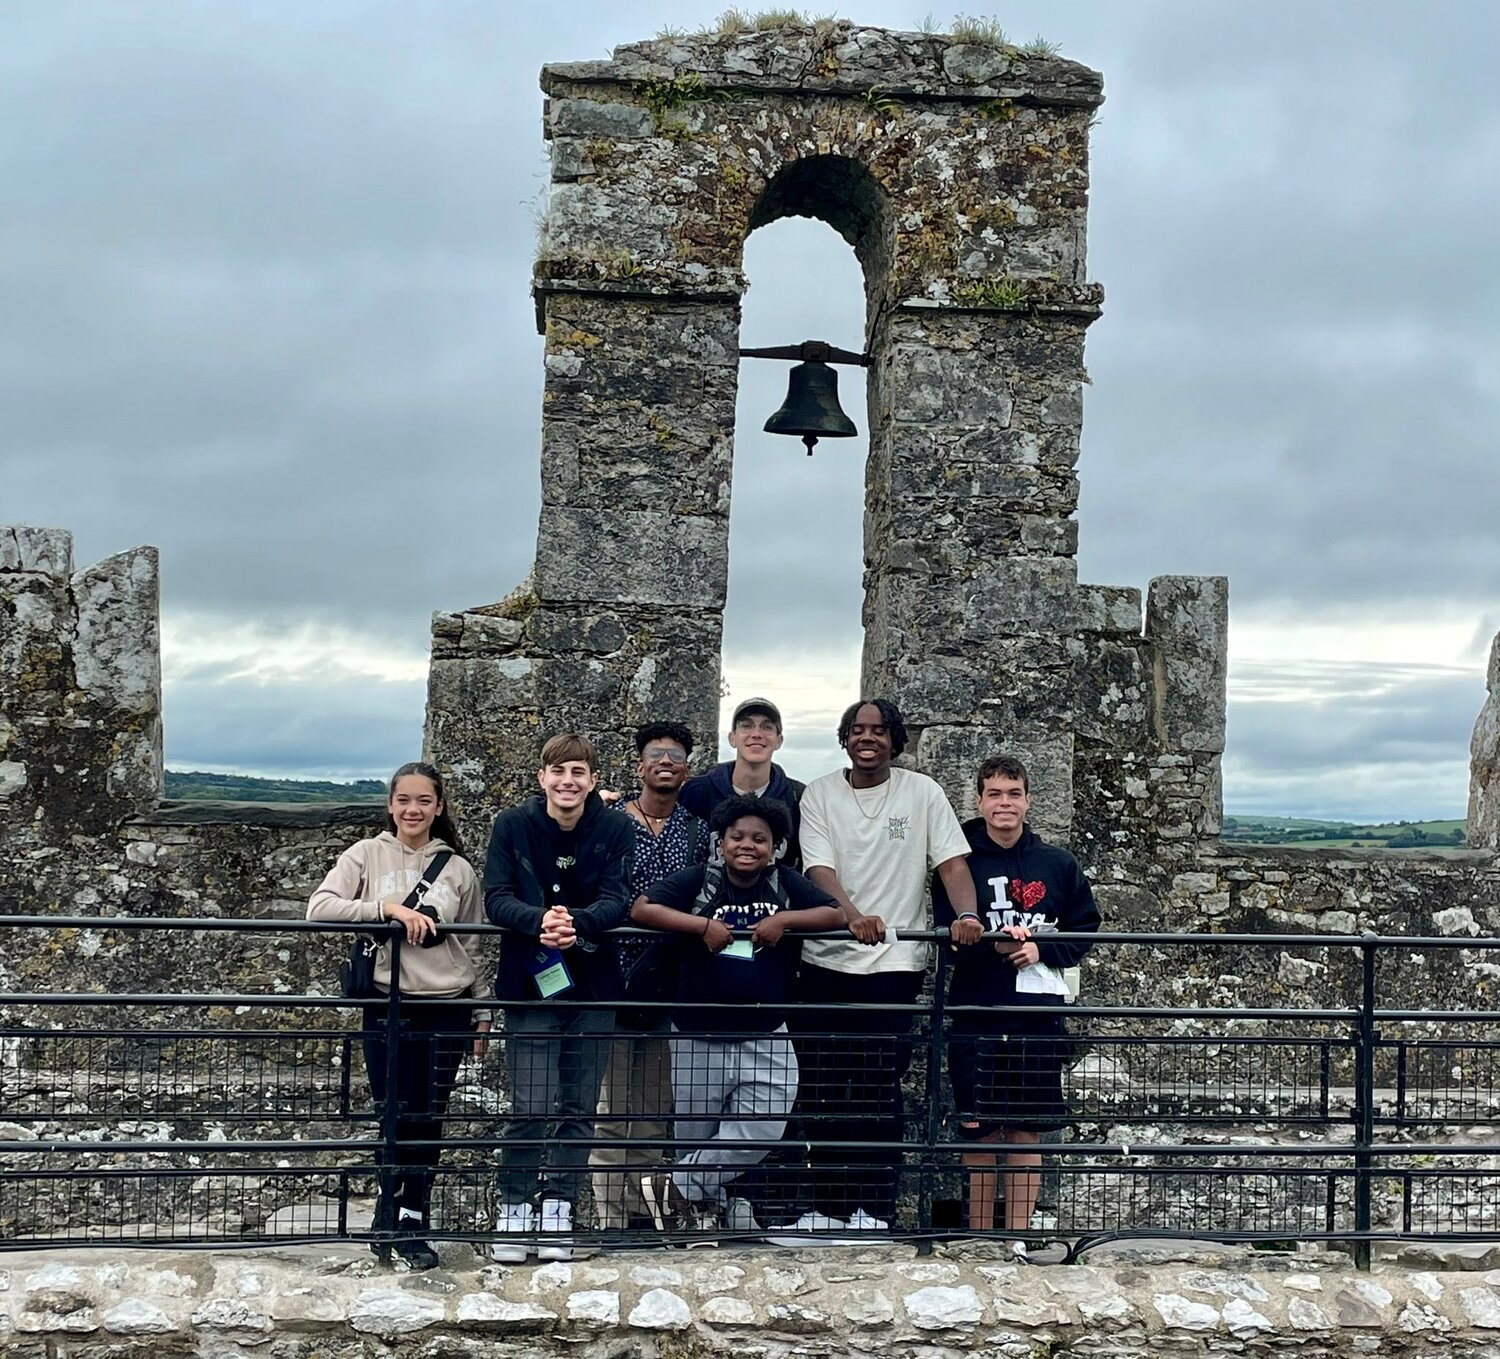 Members of the Malverne Select Choir at Blarney Castle.